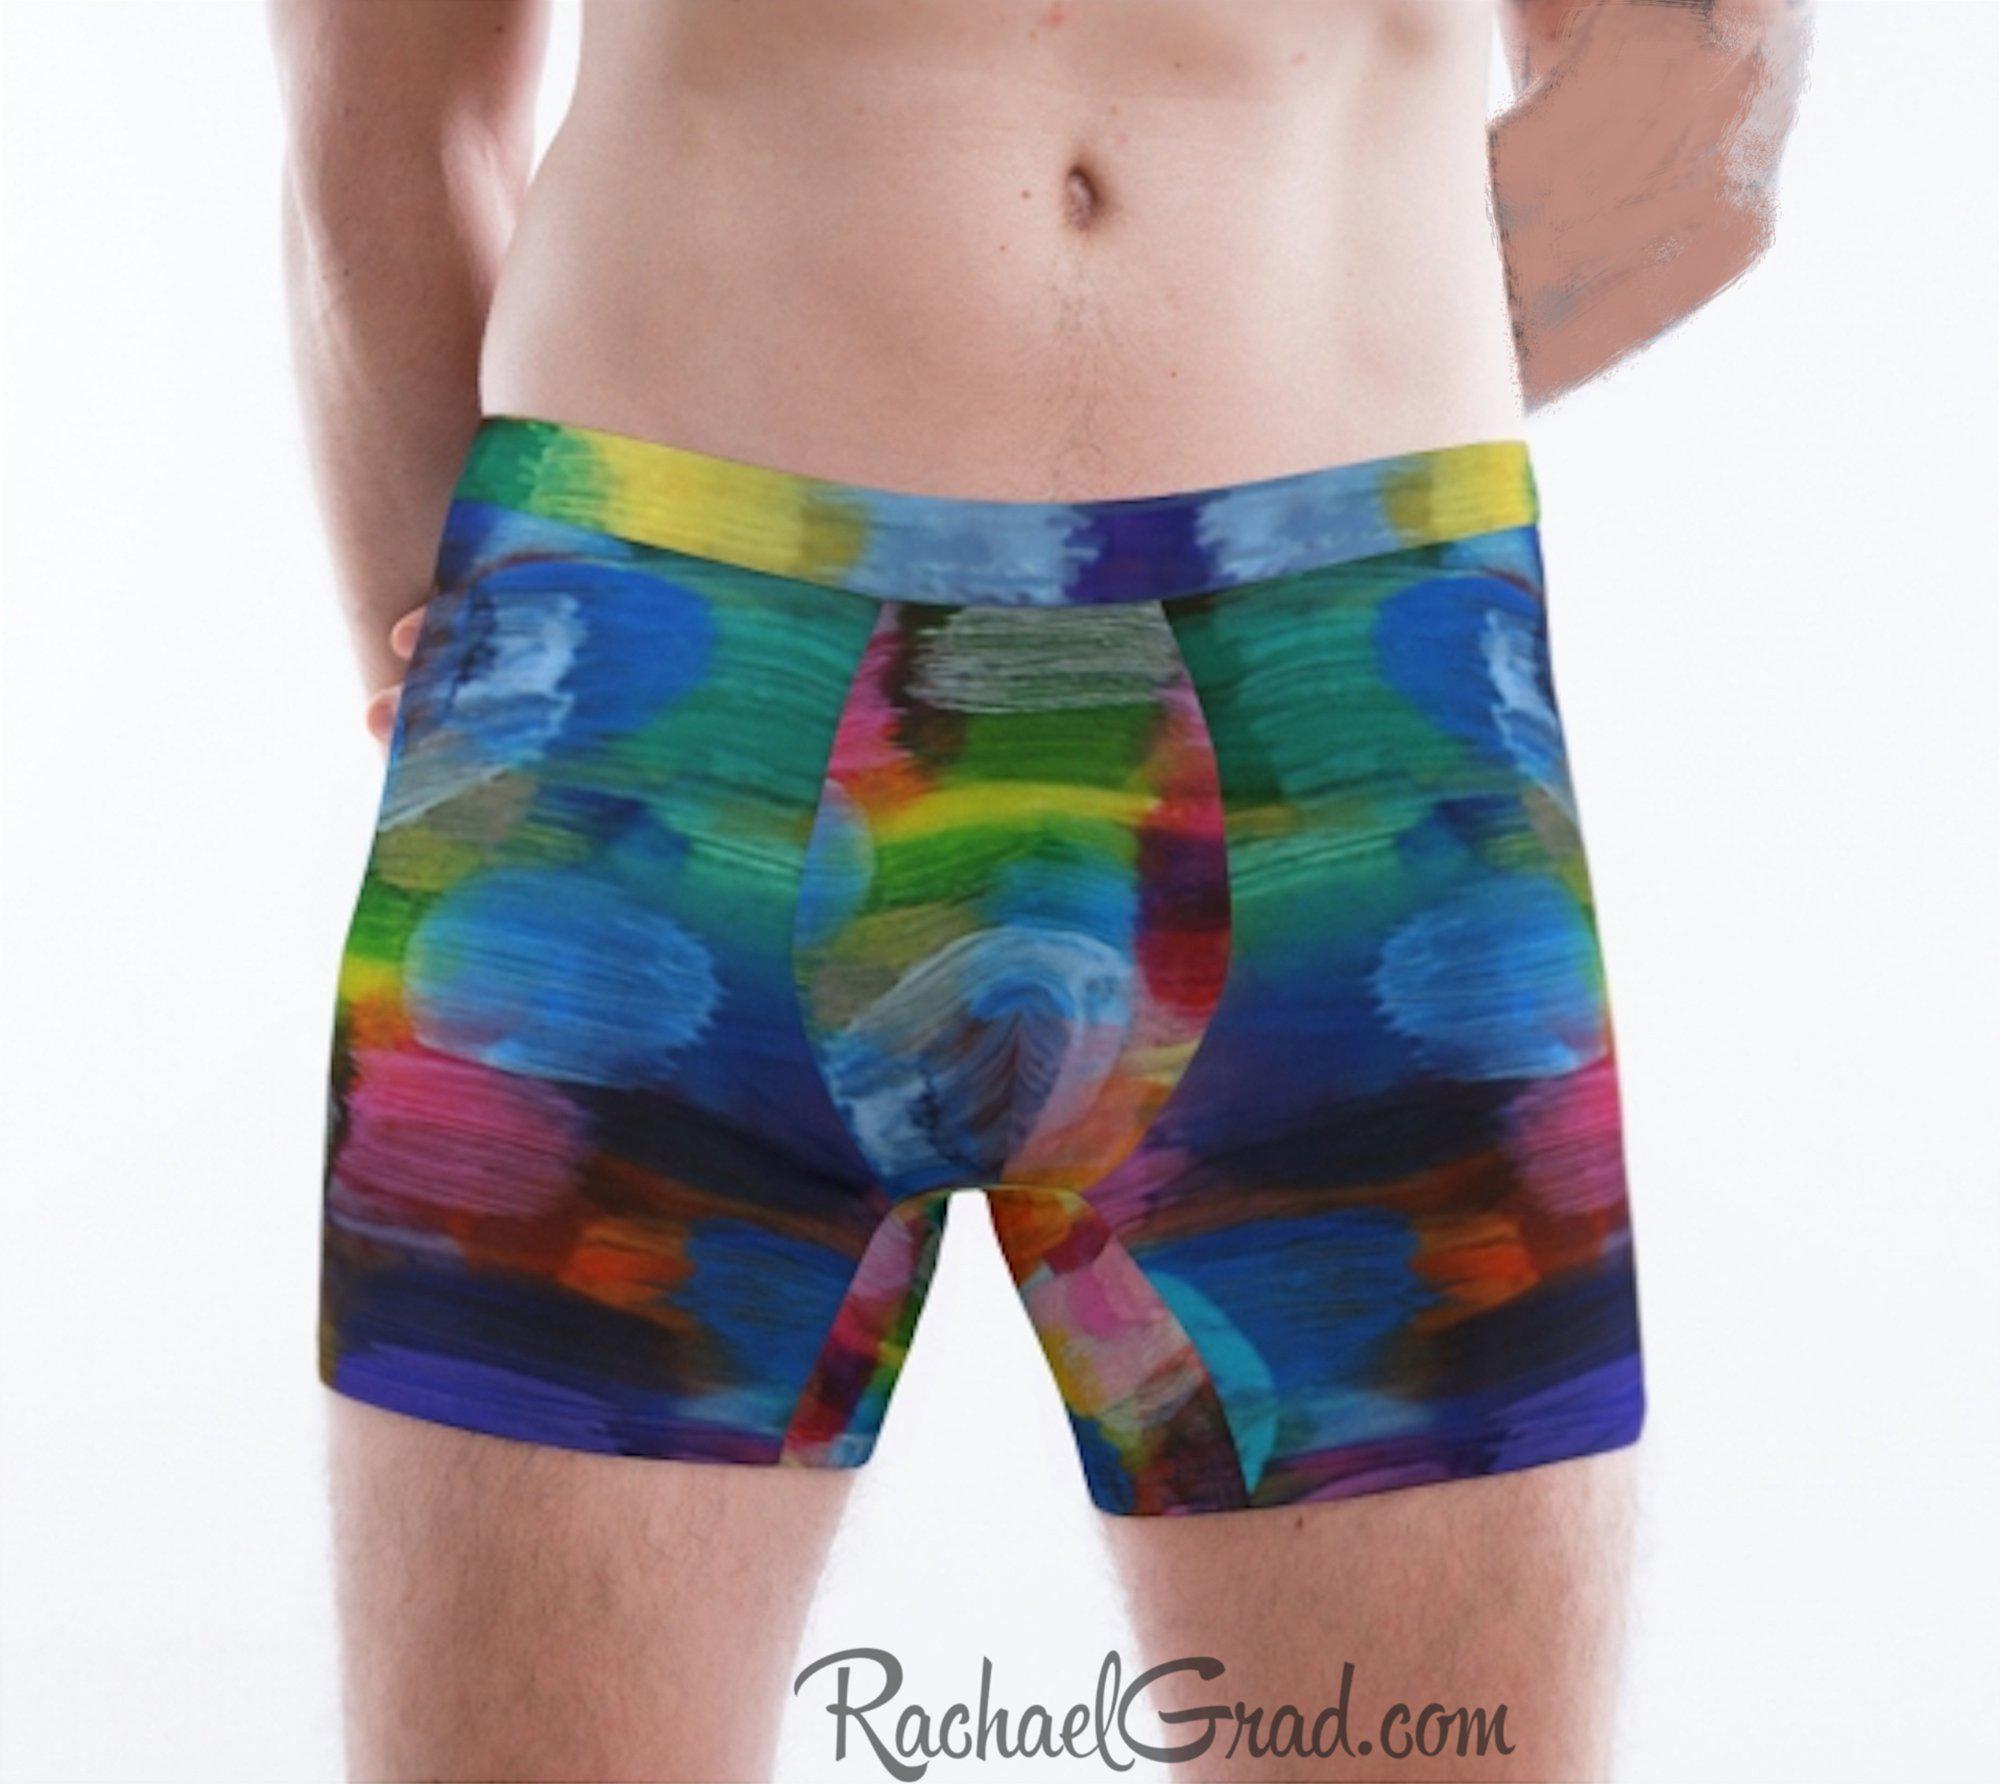 Men's Boxer Briefs - Colorful Abstract Art